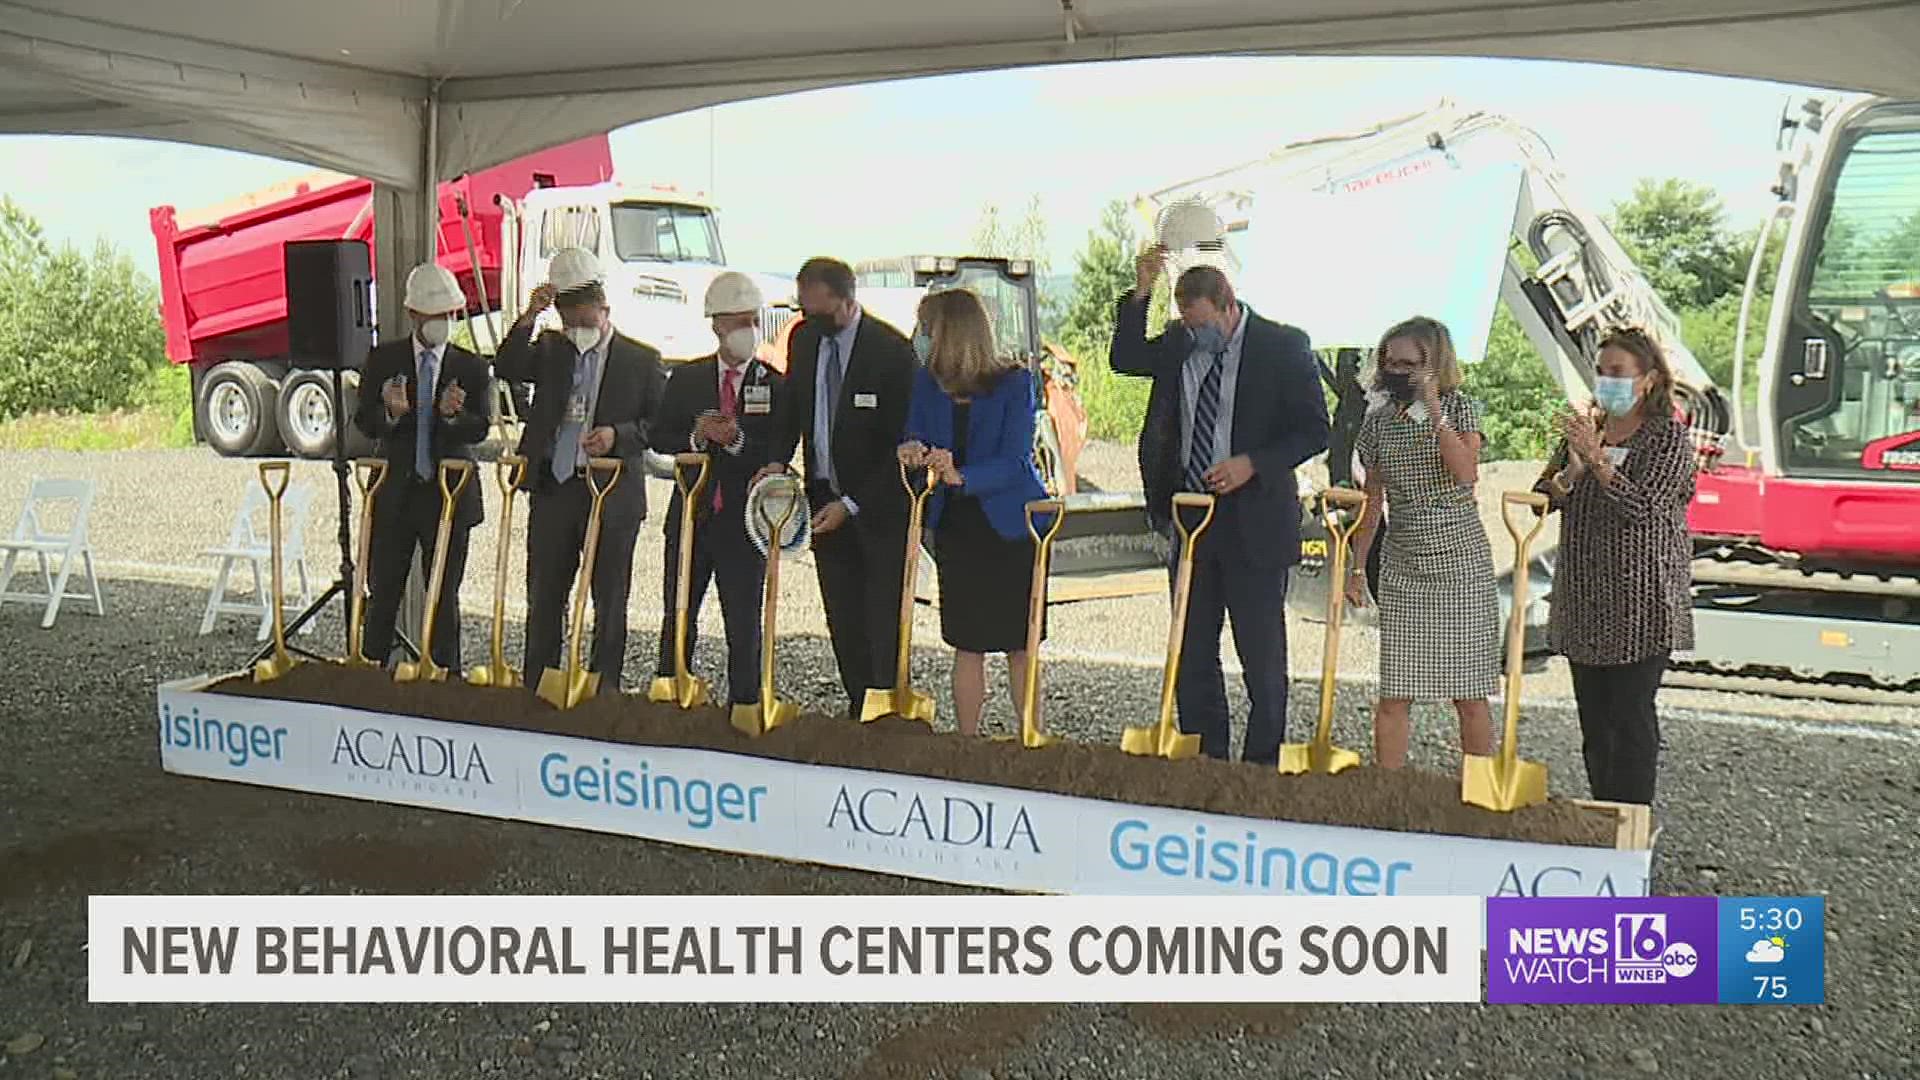 Geisinger and Acadia Healthcare have partnered to address the urgent need for services in our area.